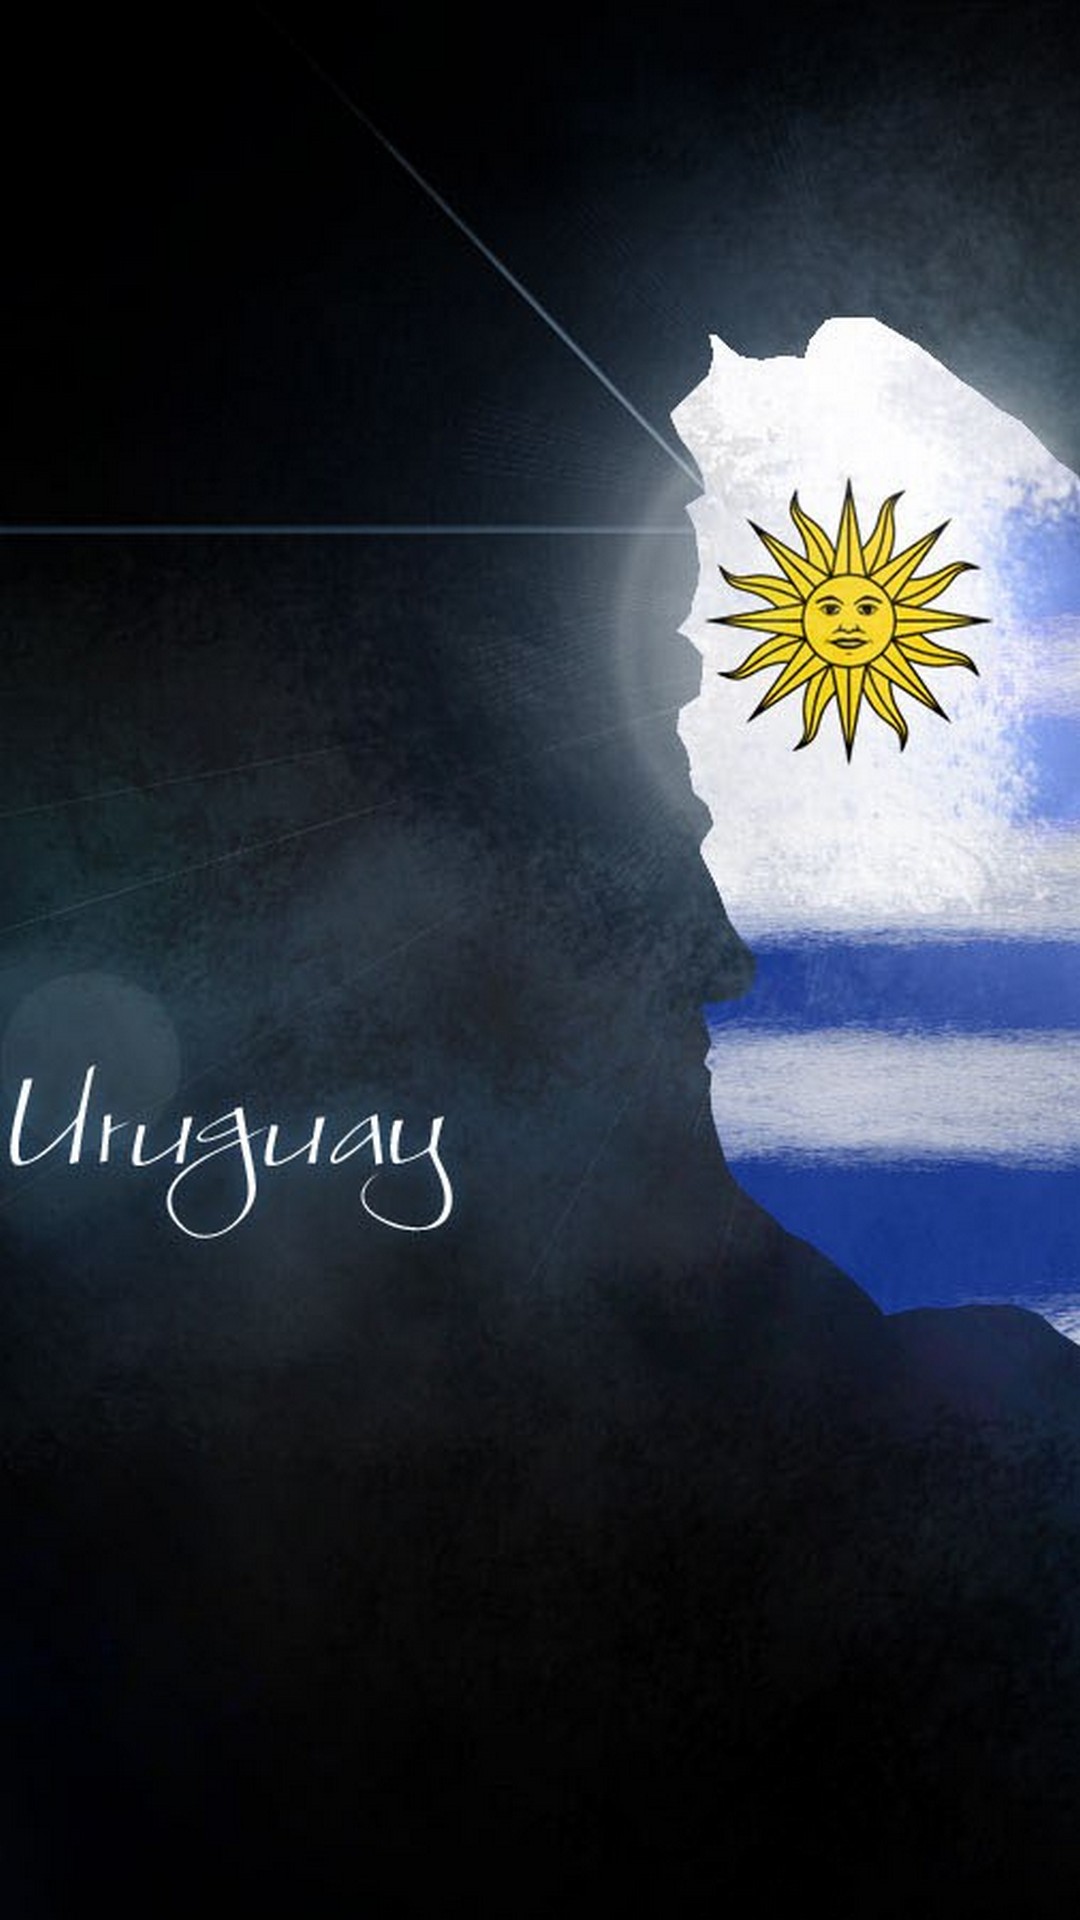 Uruguay National Team HD Wallpapers For Android with image resolution 1080x1920 pixel. You can make this wallpaper for your Android backgrounds, Tablet, Smartphones Screensavers and Mobile Phone Lock Screen